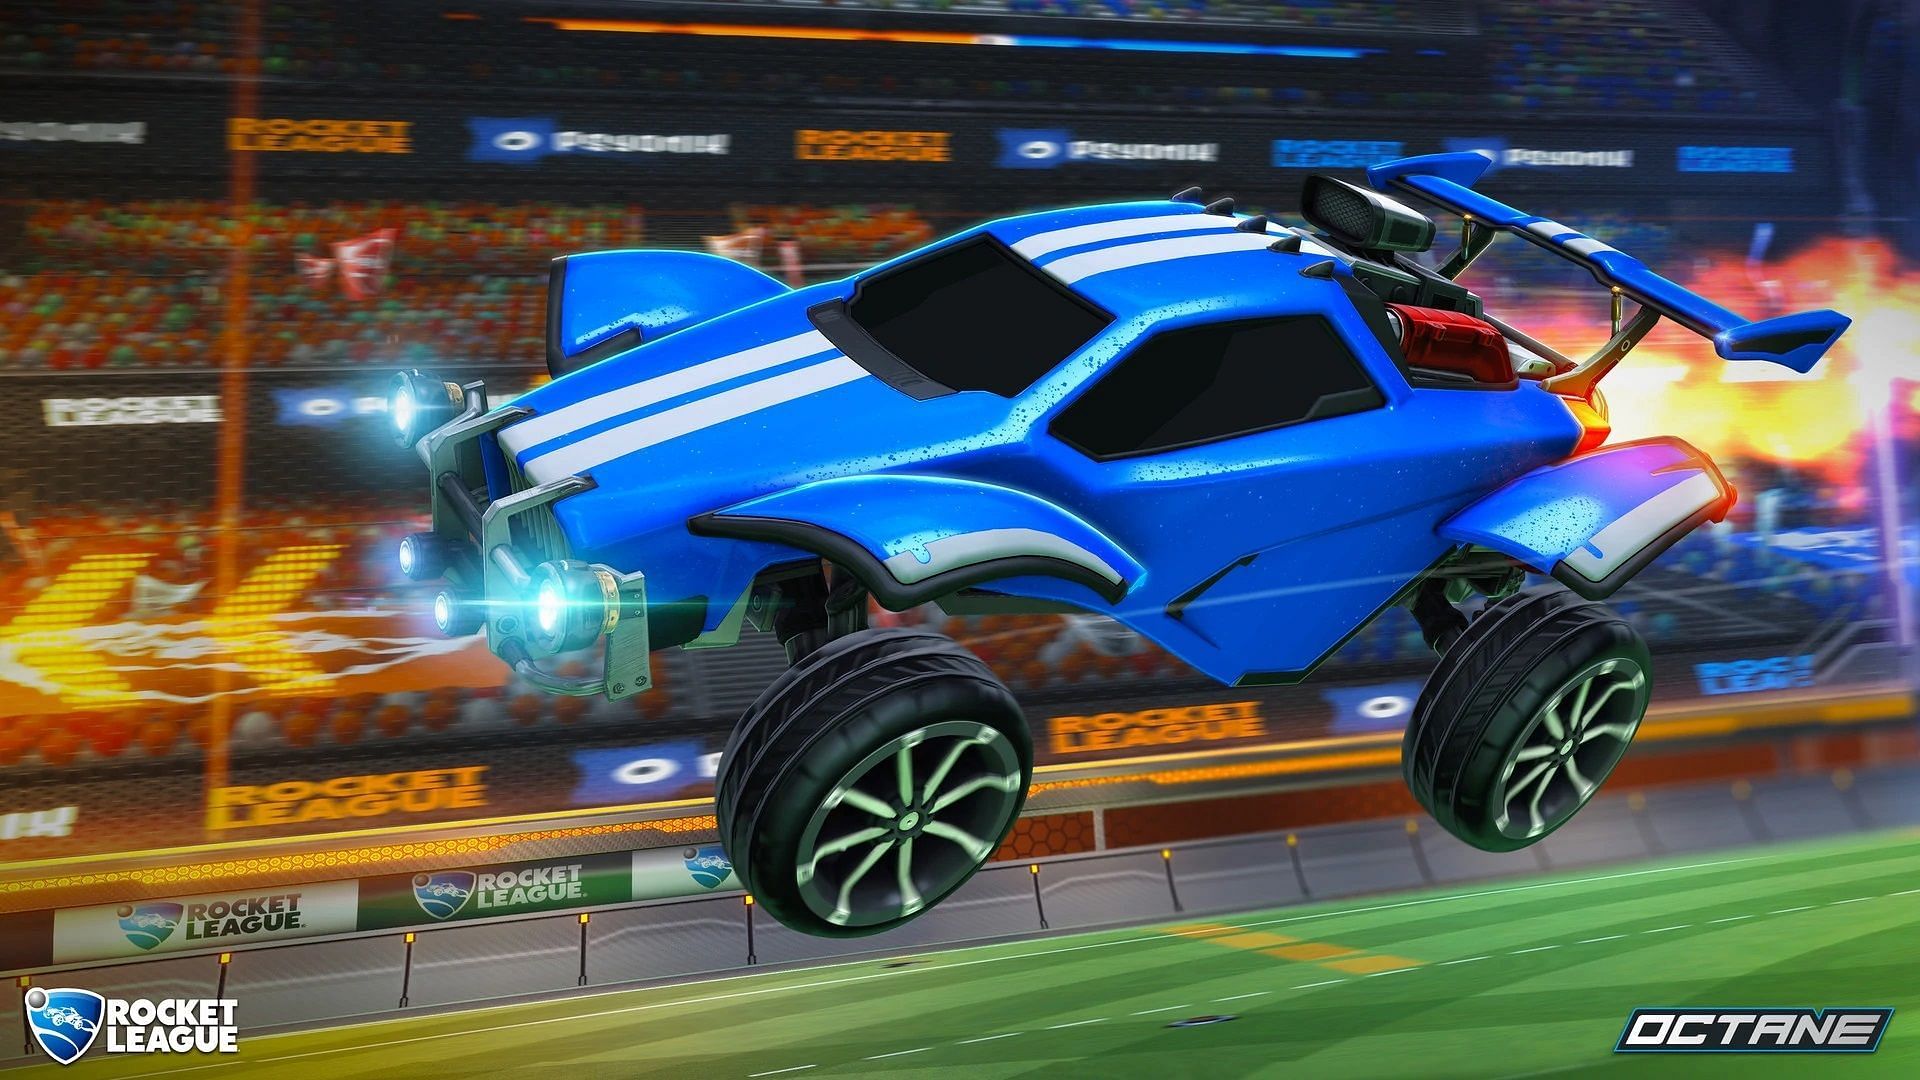 Octane is the most popular vehicle in Rocket League (Image via Epic Games)